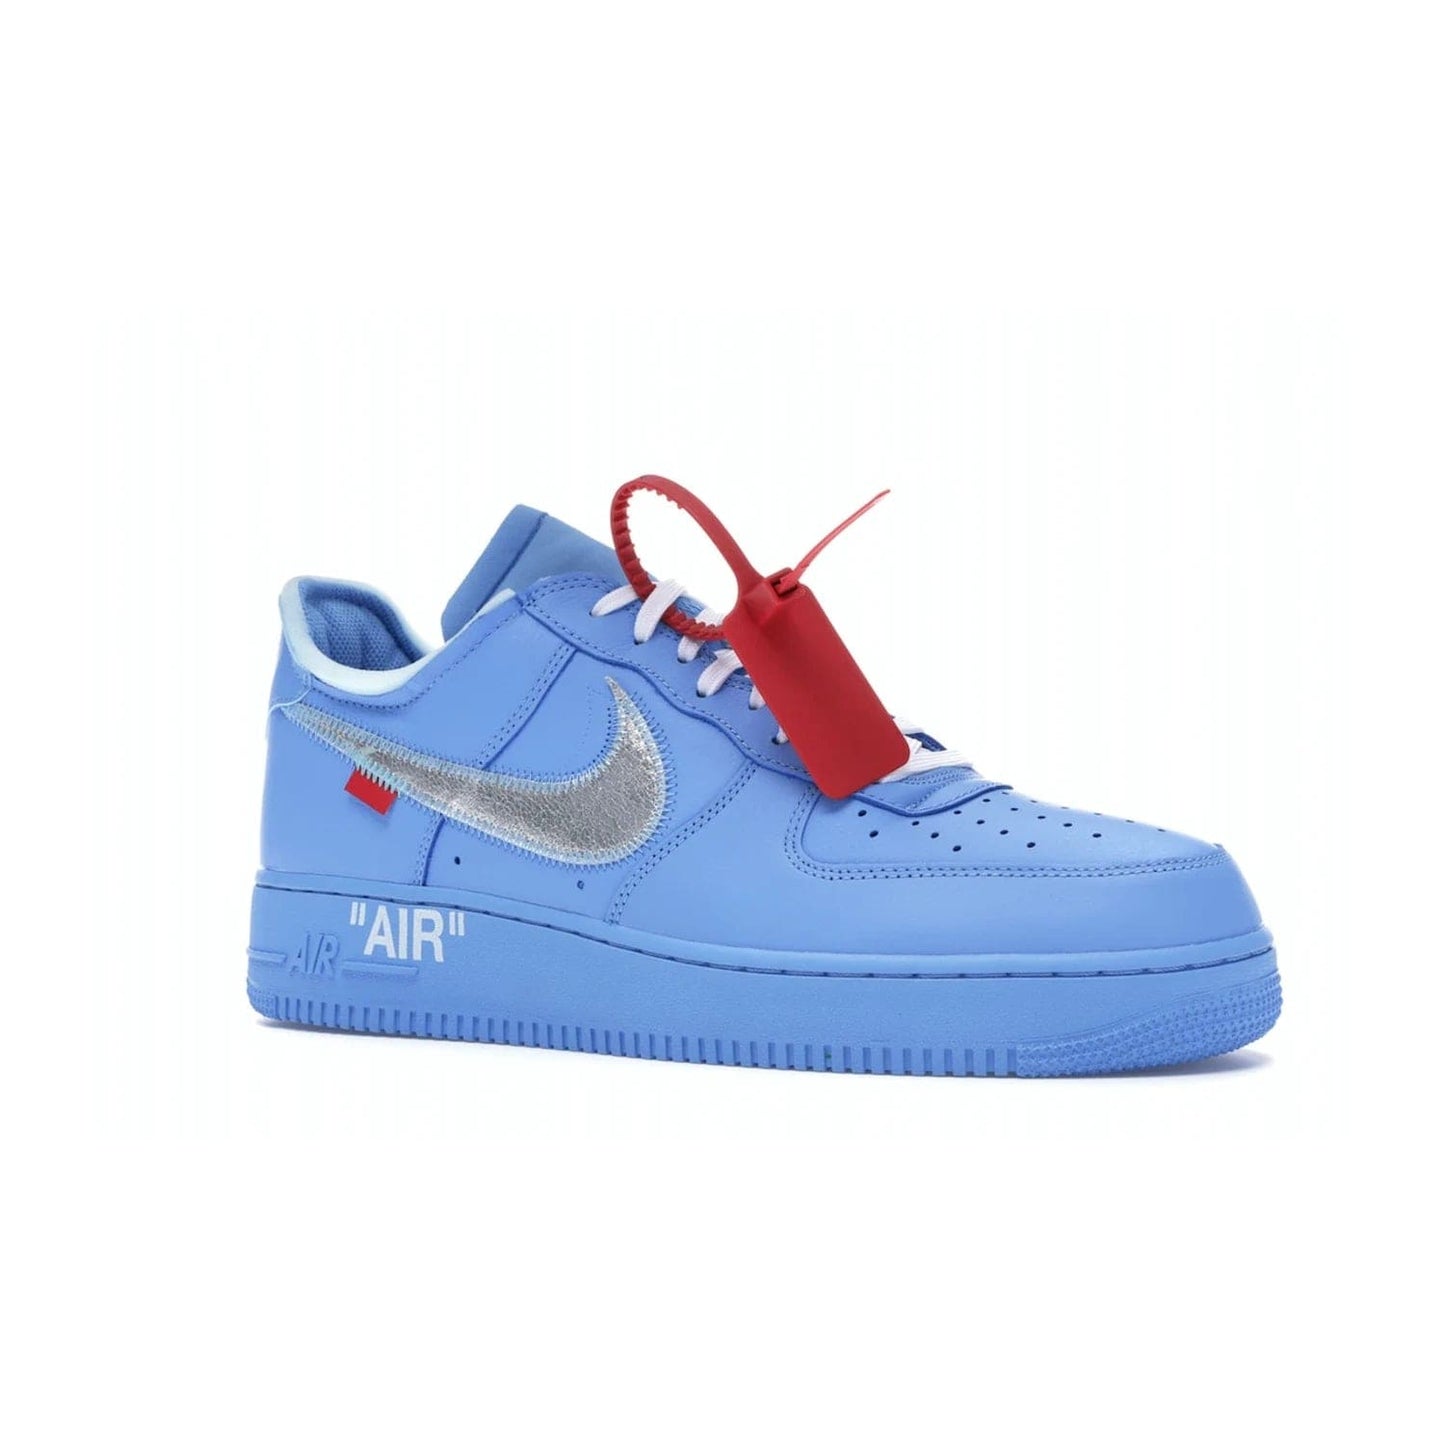 Nike Air Force 1 Low Off-White MCA University Blue - Image 4 - Only at www.BallersClubKickz.com - Virgil Abloh's Air Force 1 Low Off-White MCA University Blue: Features University Blue leather and midsole, reflective silver Nike Swoosh, red zip tie, white laces, and iconic Off-White™ branding. A must-have for any Virgil Abloh enthusiast.